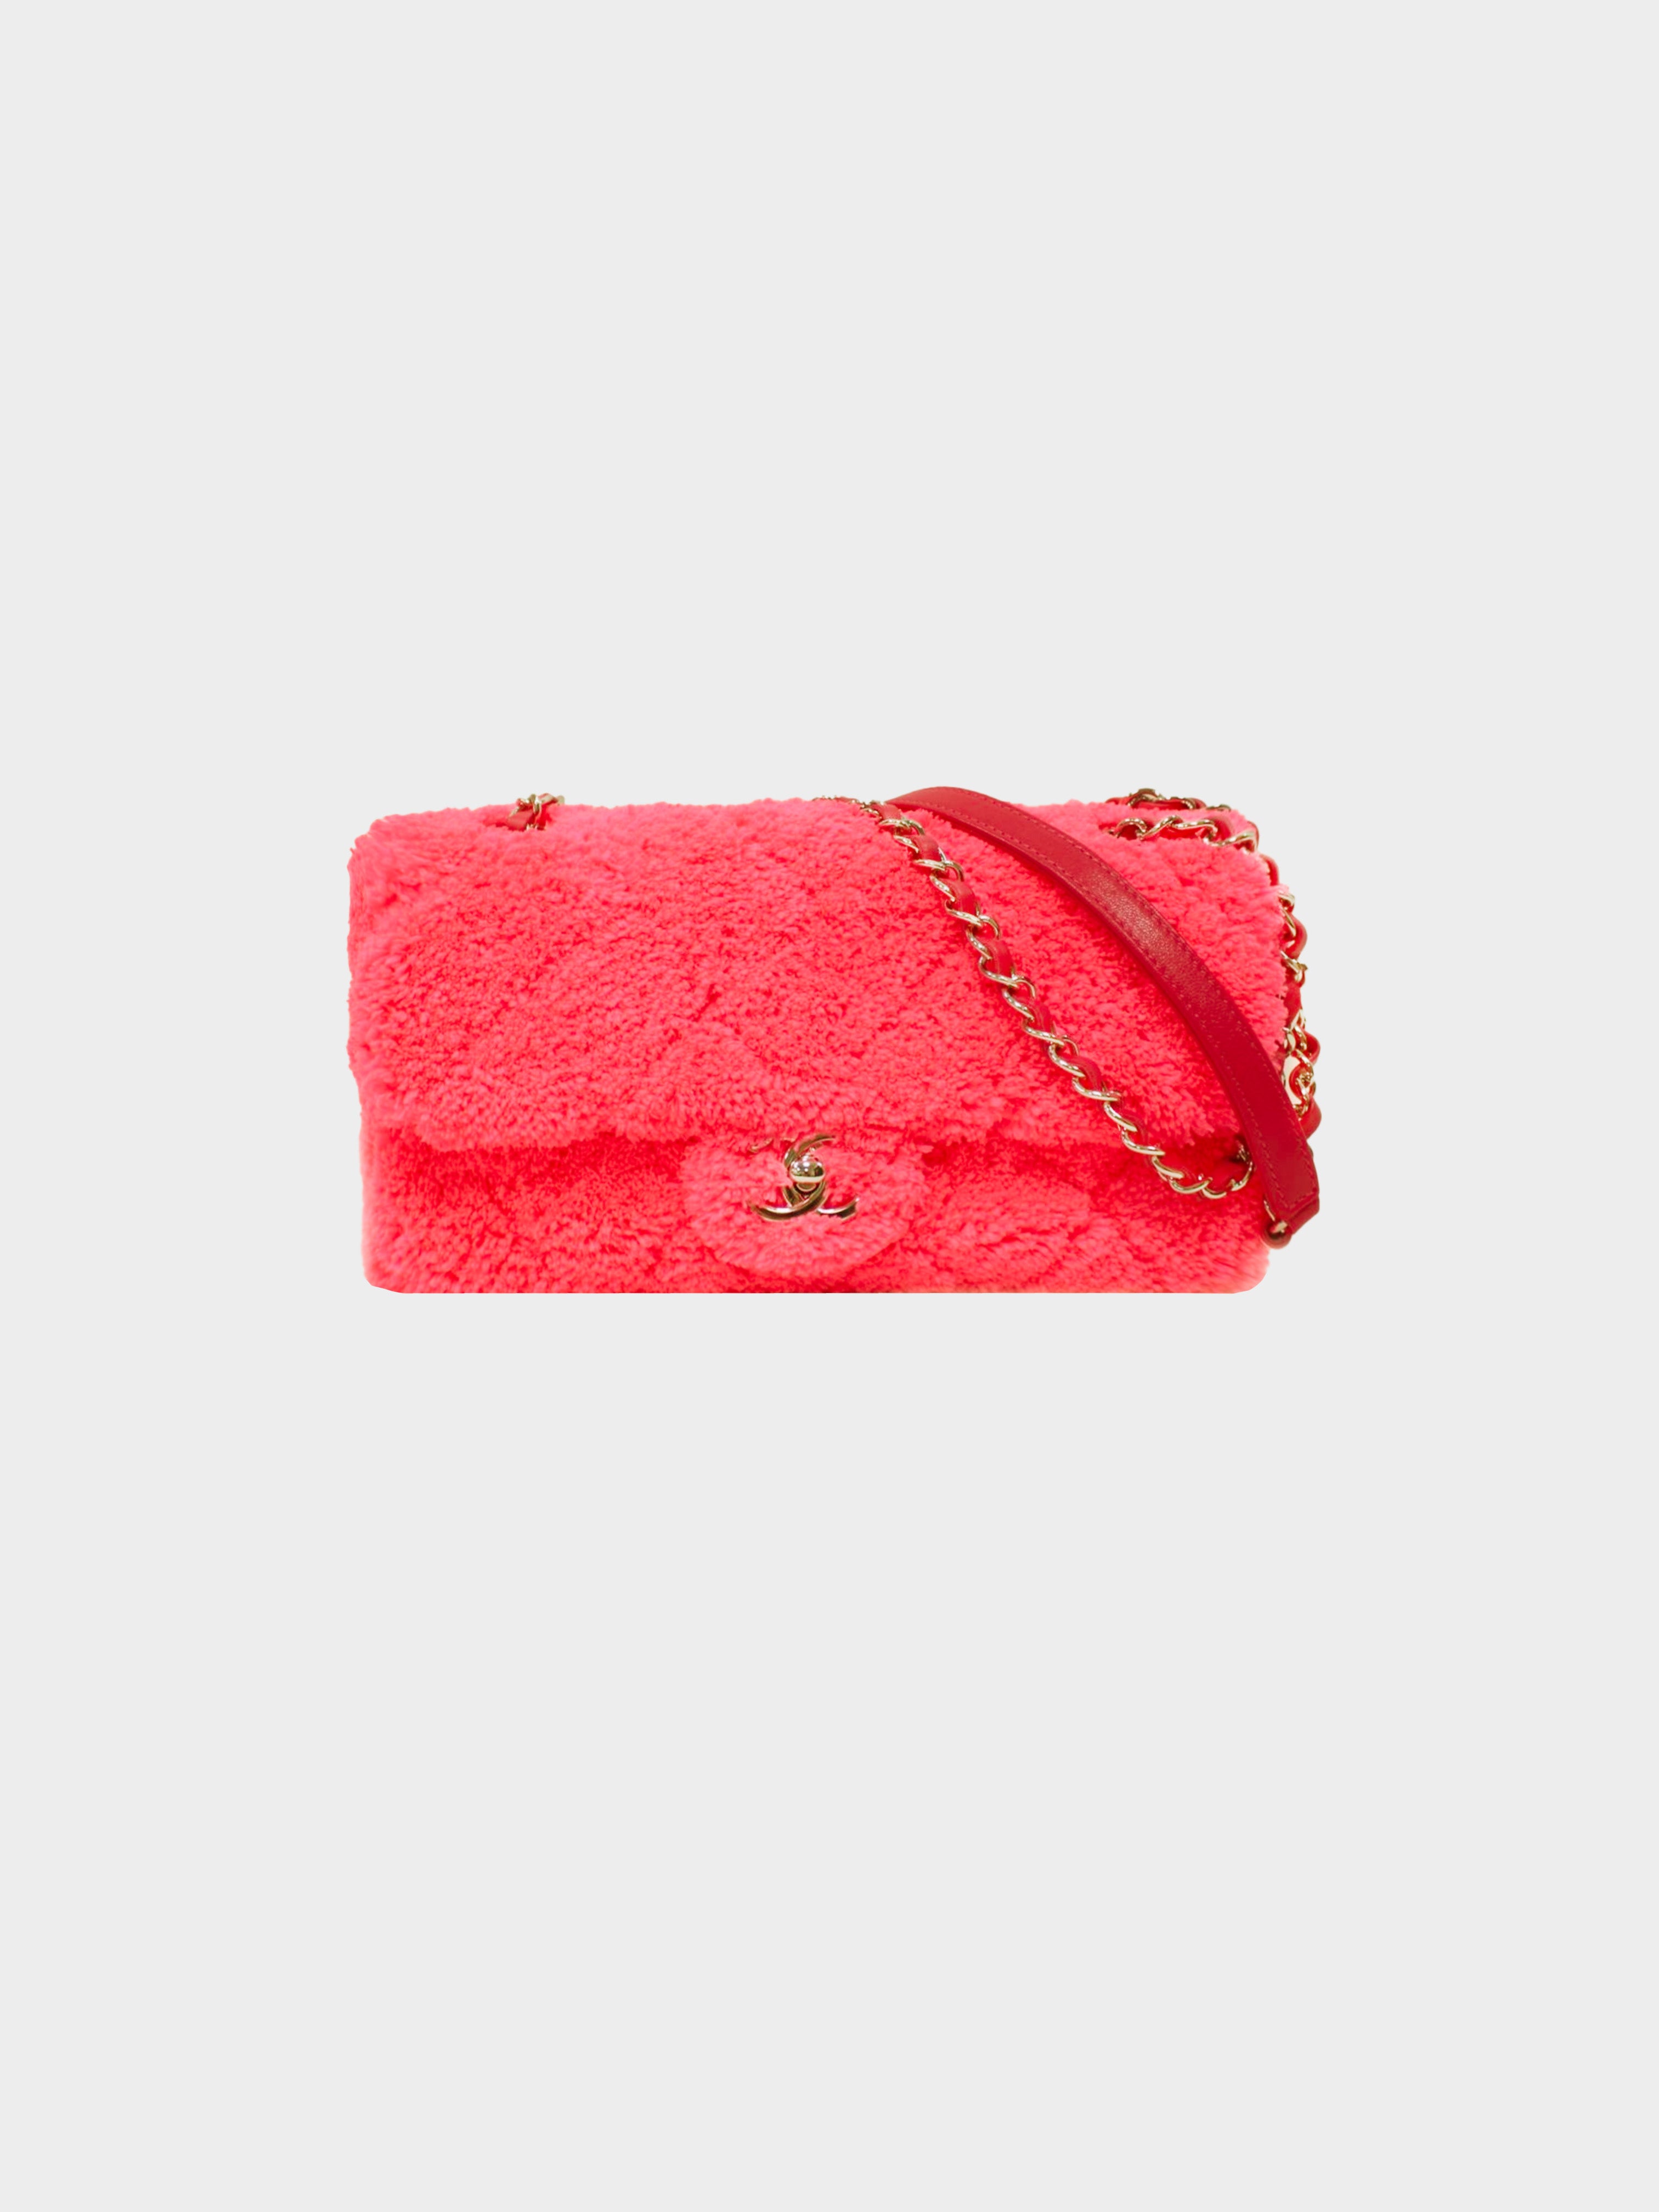 Buy Chanel Resin Bag Online In India -  India